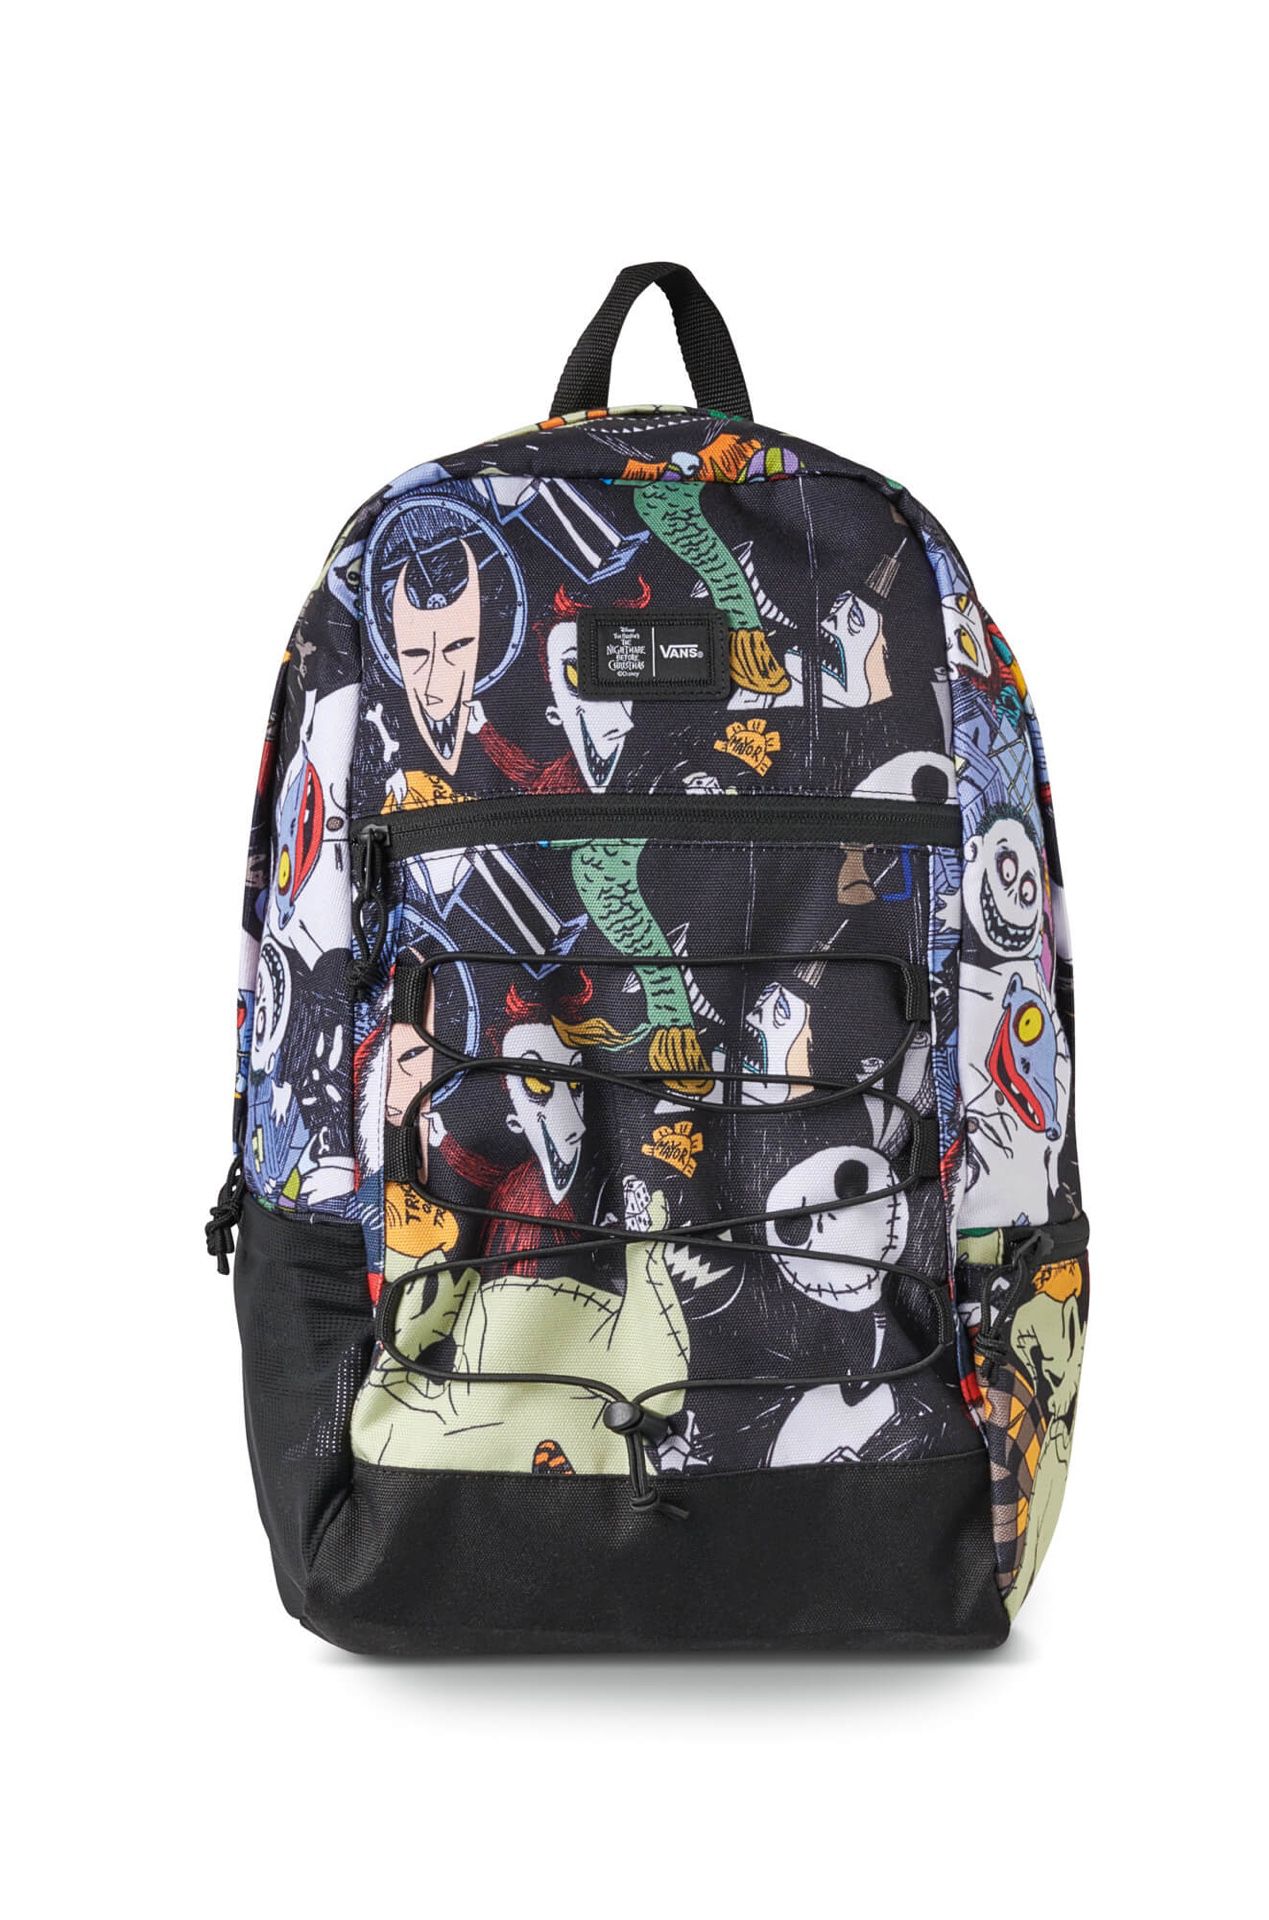 Vans Nightmare before Christmas backpack sold out limited edition